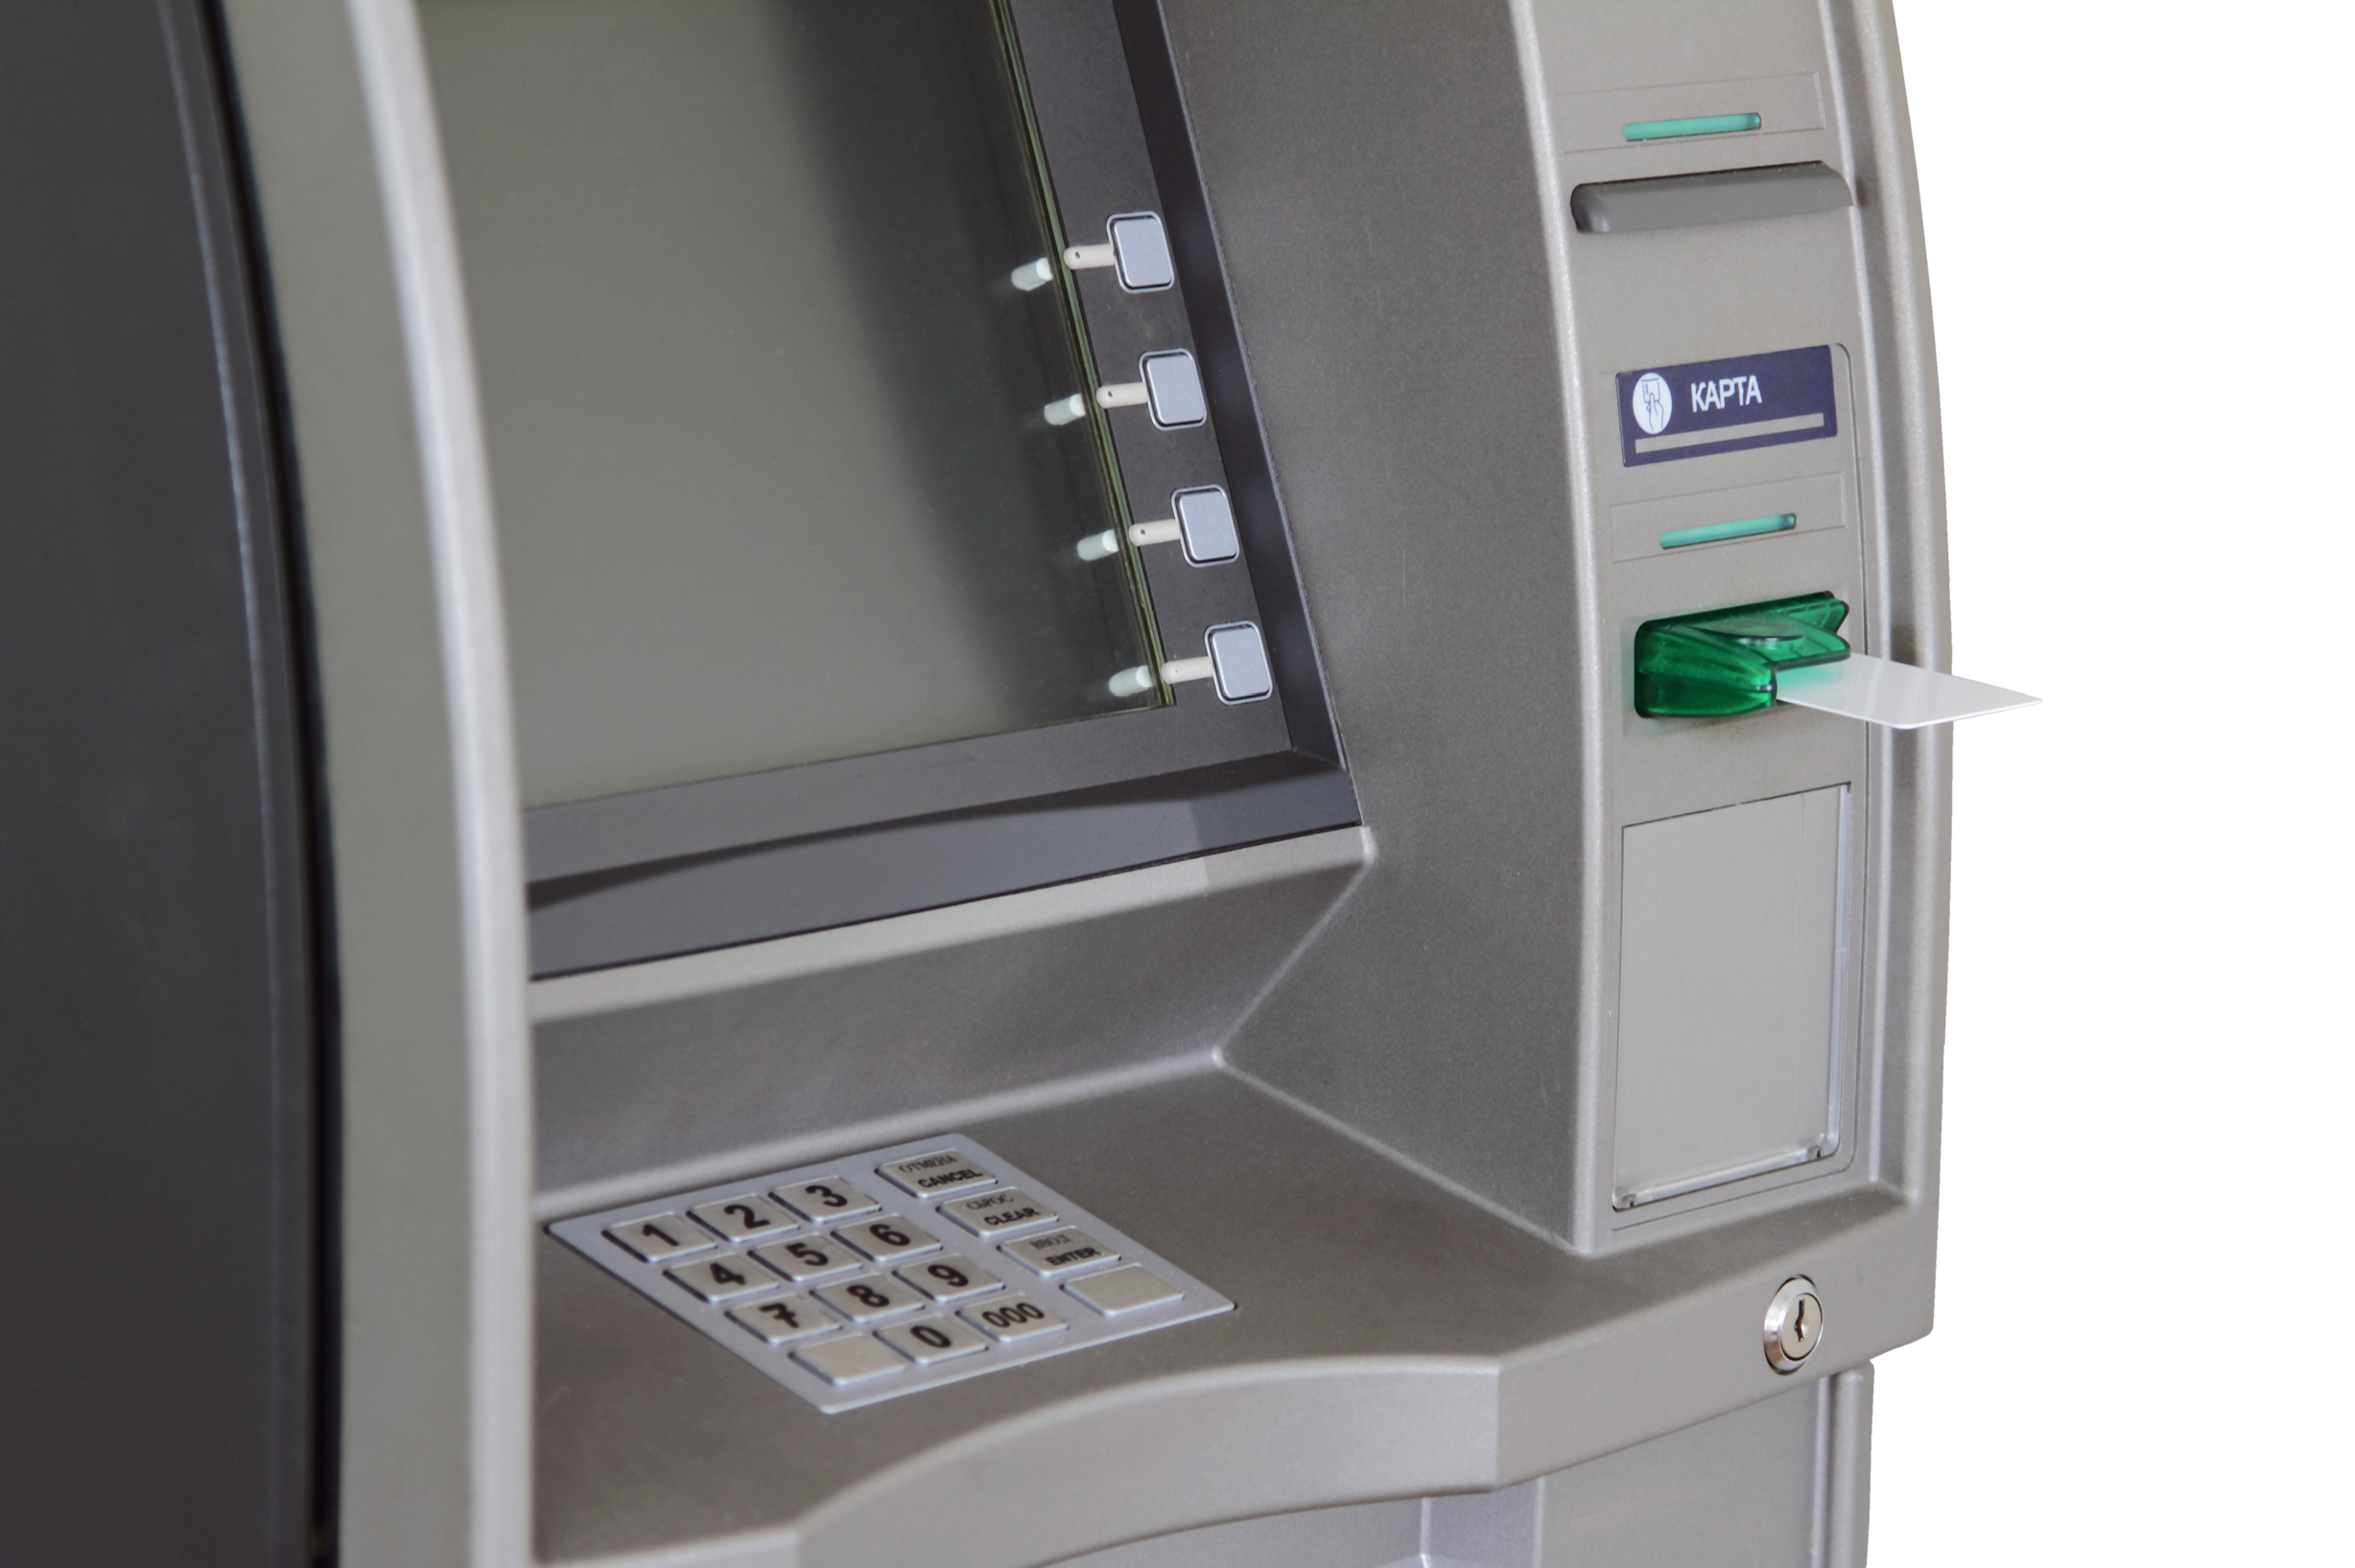 Four men indicted in Queens on over 900 counts of grand larceny for ATM ...